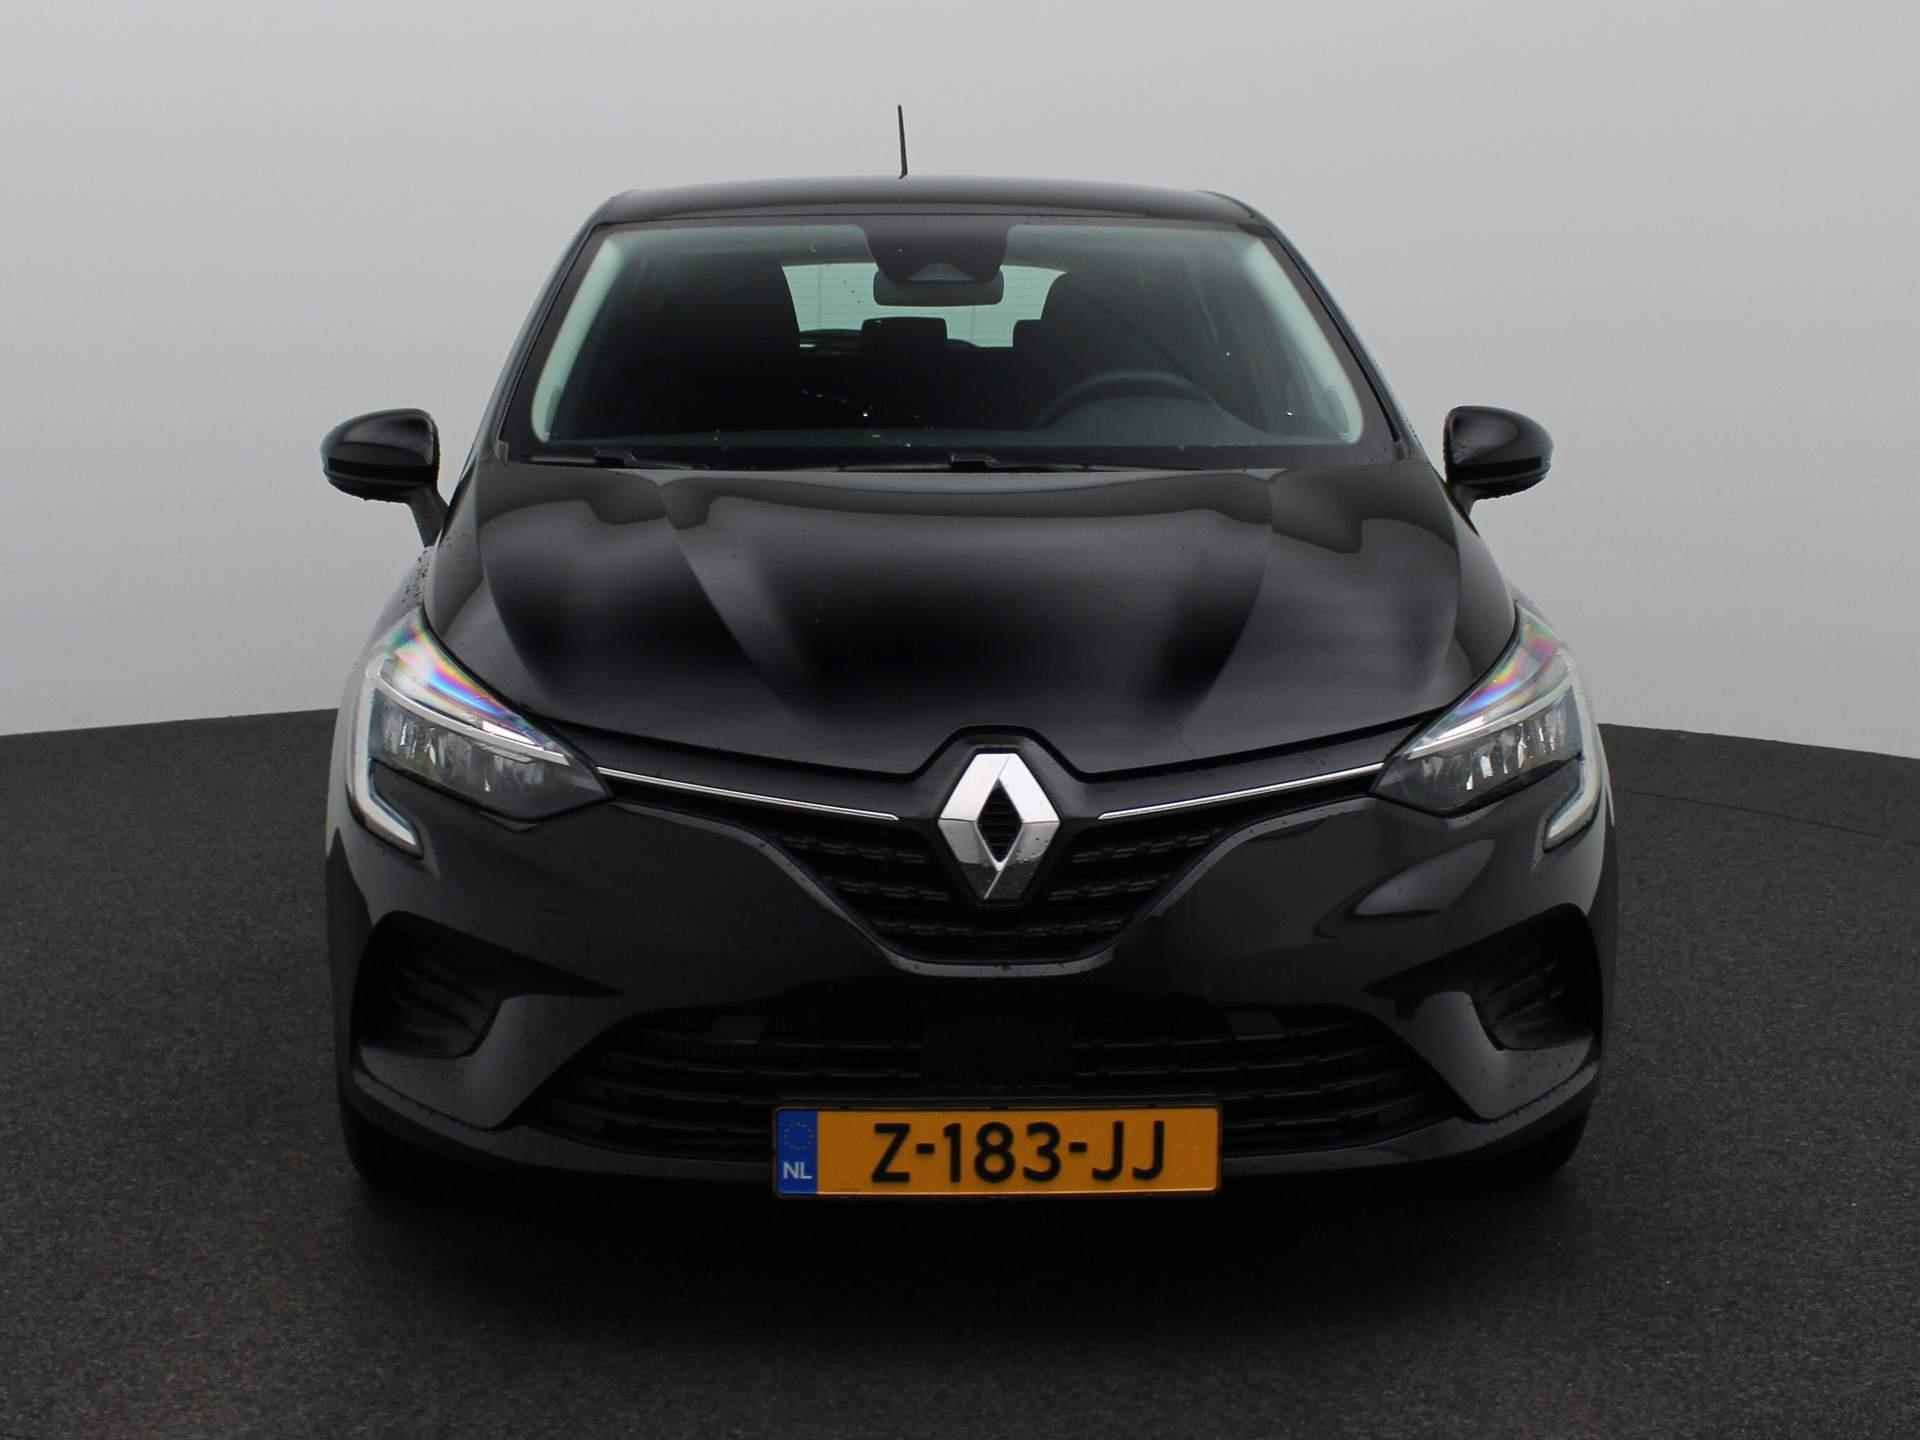 Renault Clio 1.6 E-Tech Full Hybrid 145 Equilibre | PDC Achter | Airconditioning | Draadloze Apple Carplay & Android Auto | Cruise Control | Licht- en regensensor - 3/36